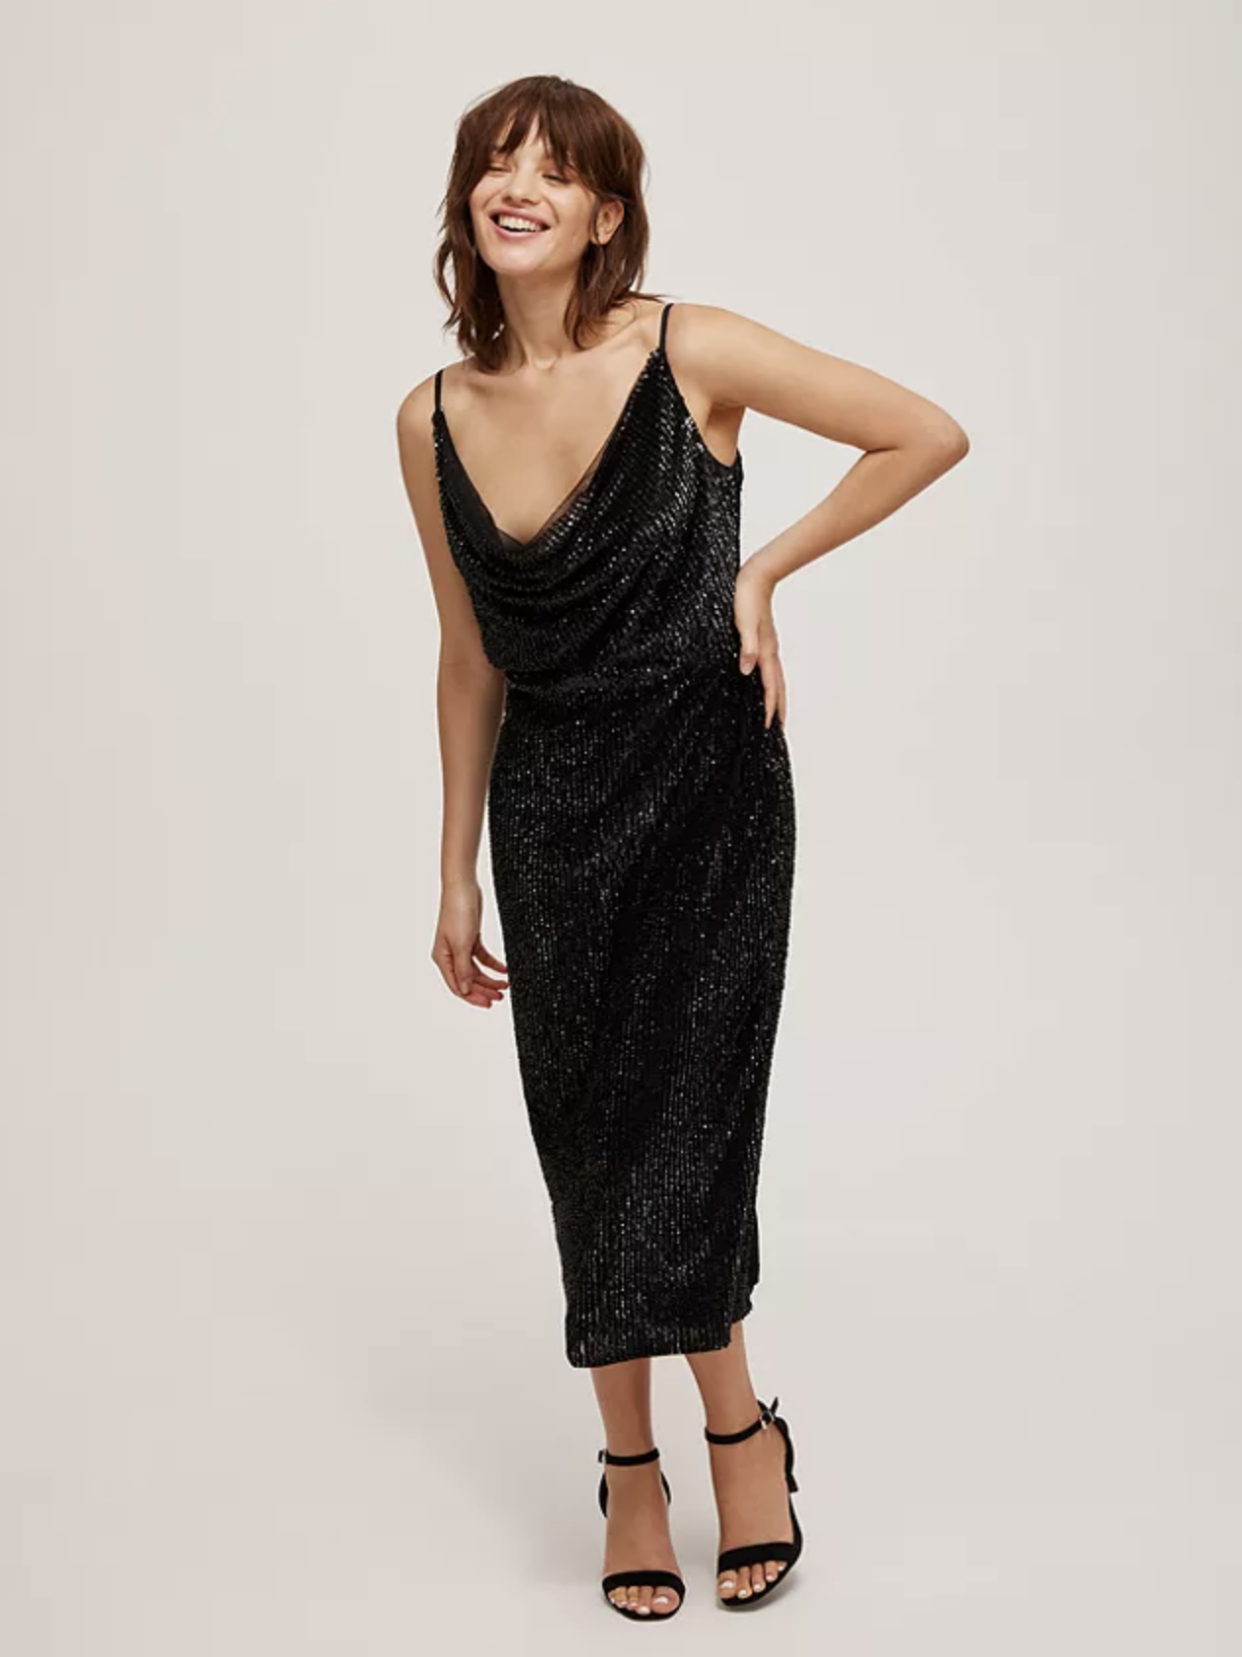 This scoop neck dress can be effortlessly dressed up or down. (John Lewis)